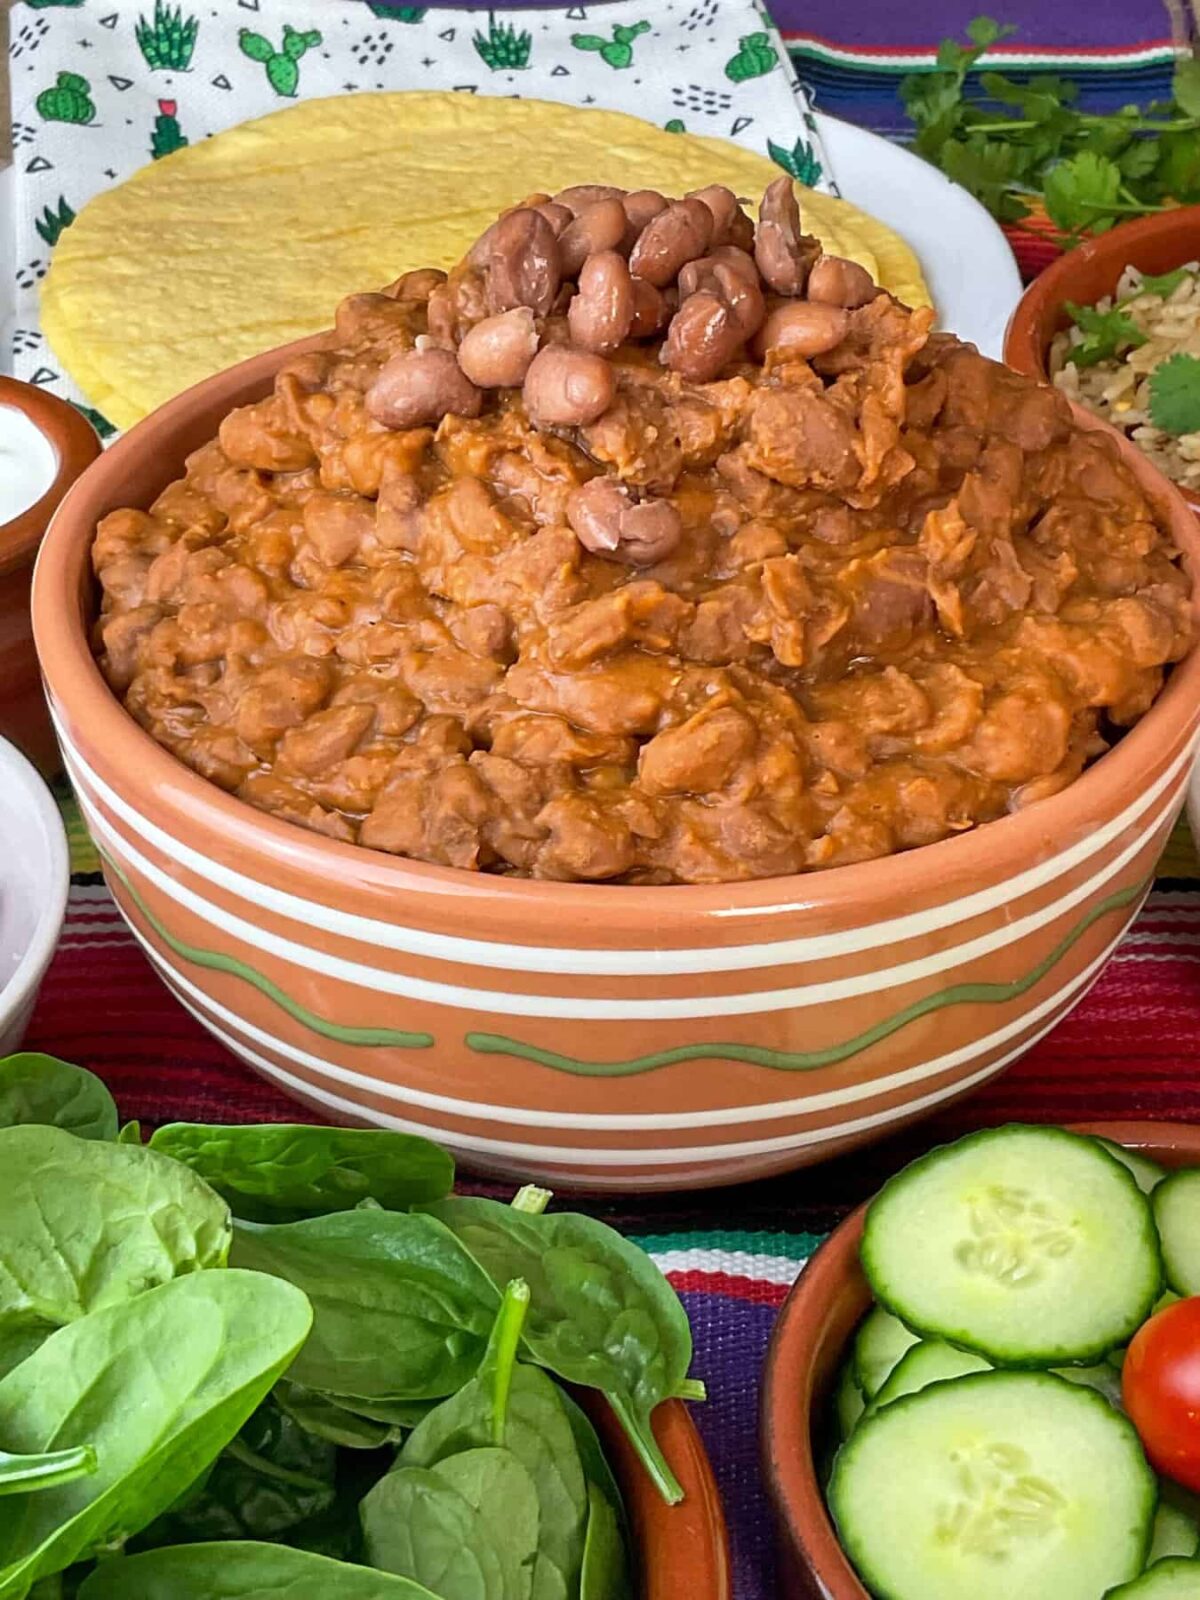 Vegan refried beans in a tan coloured serving bowl with white and green stripes, salad at the front, and tortilla wraps at the back, stripy colourful table mat background.